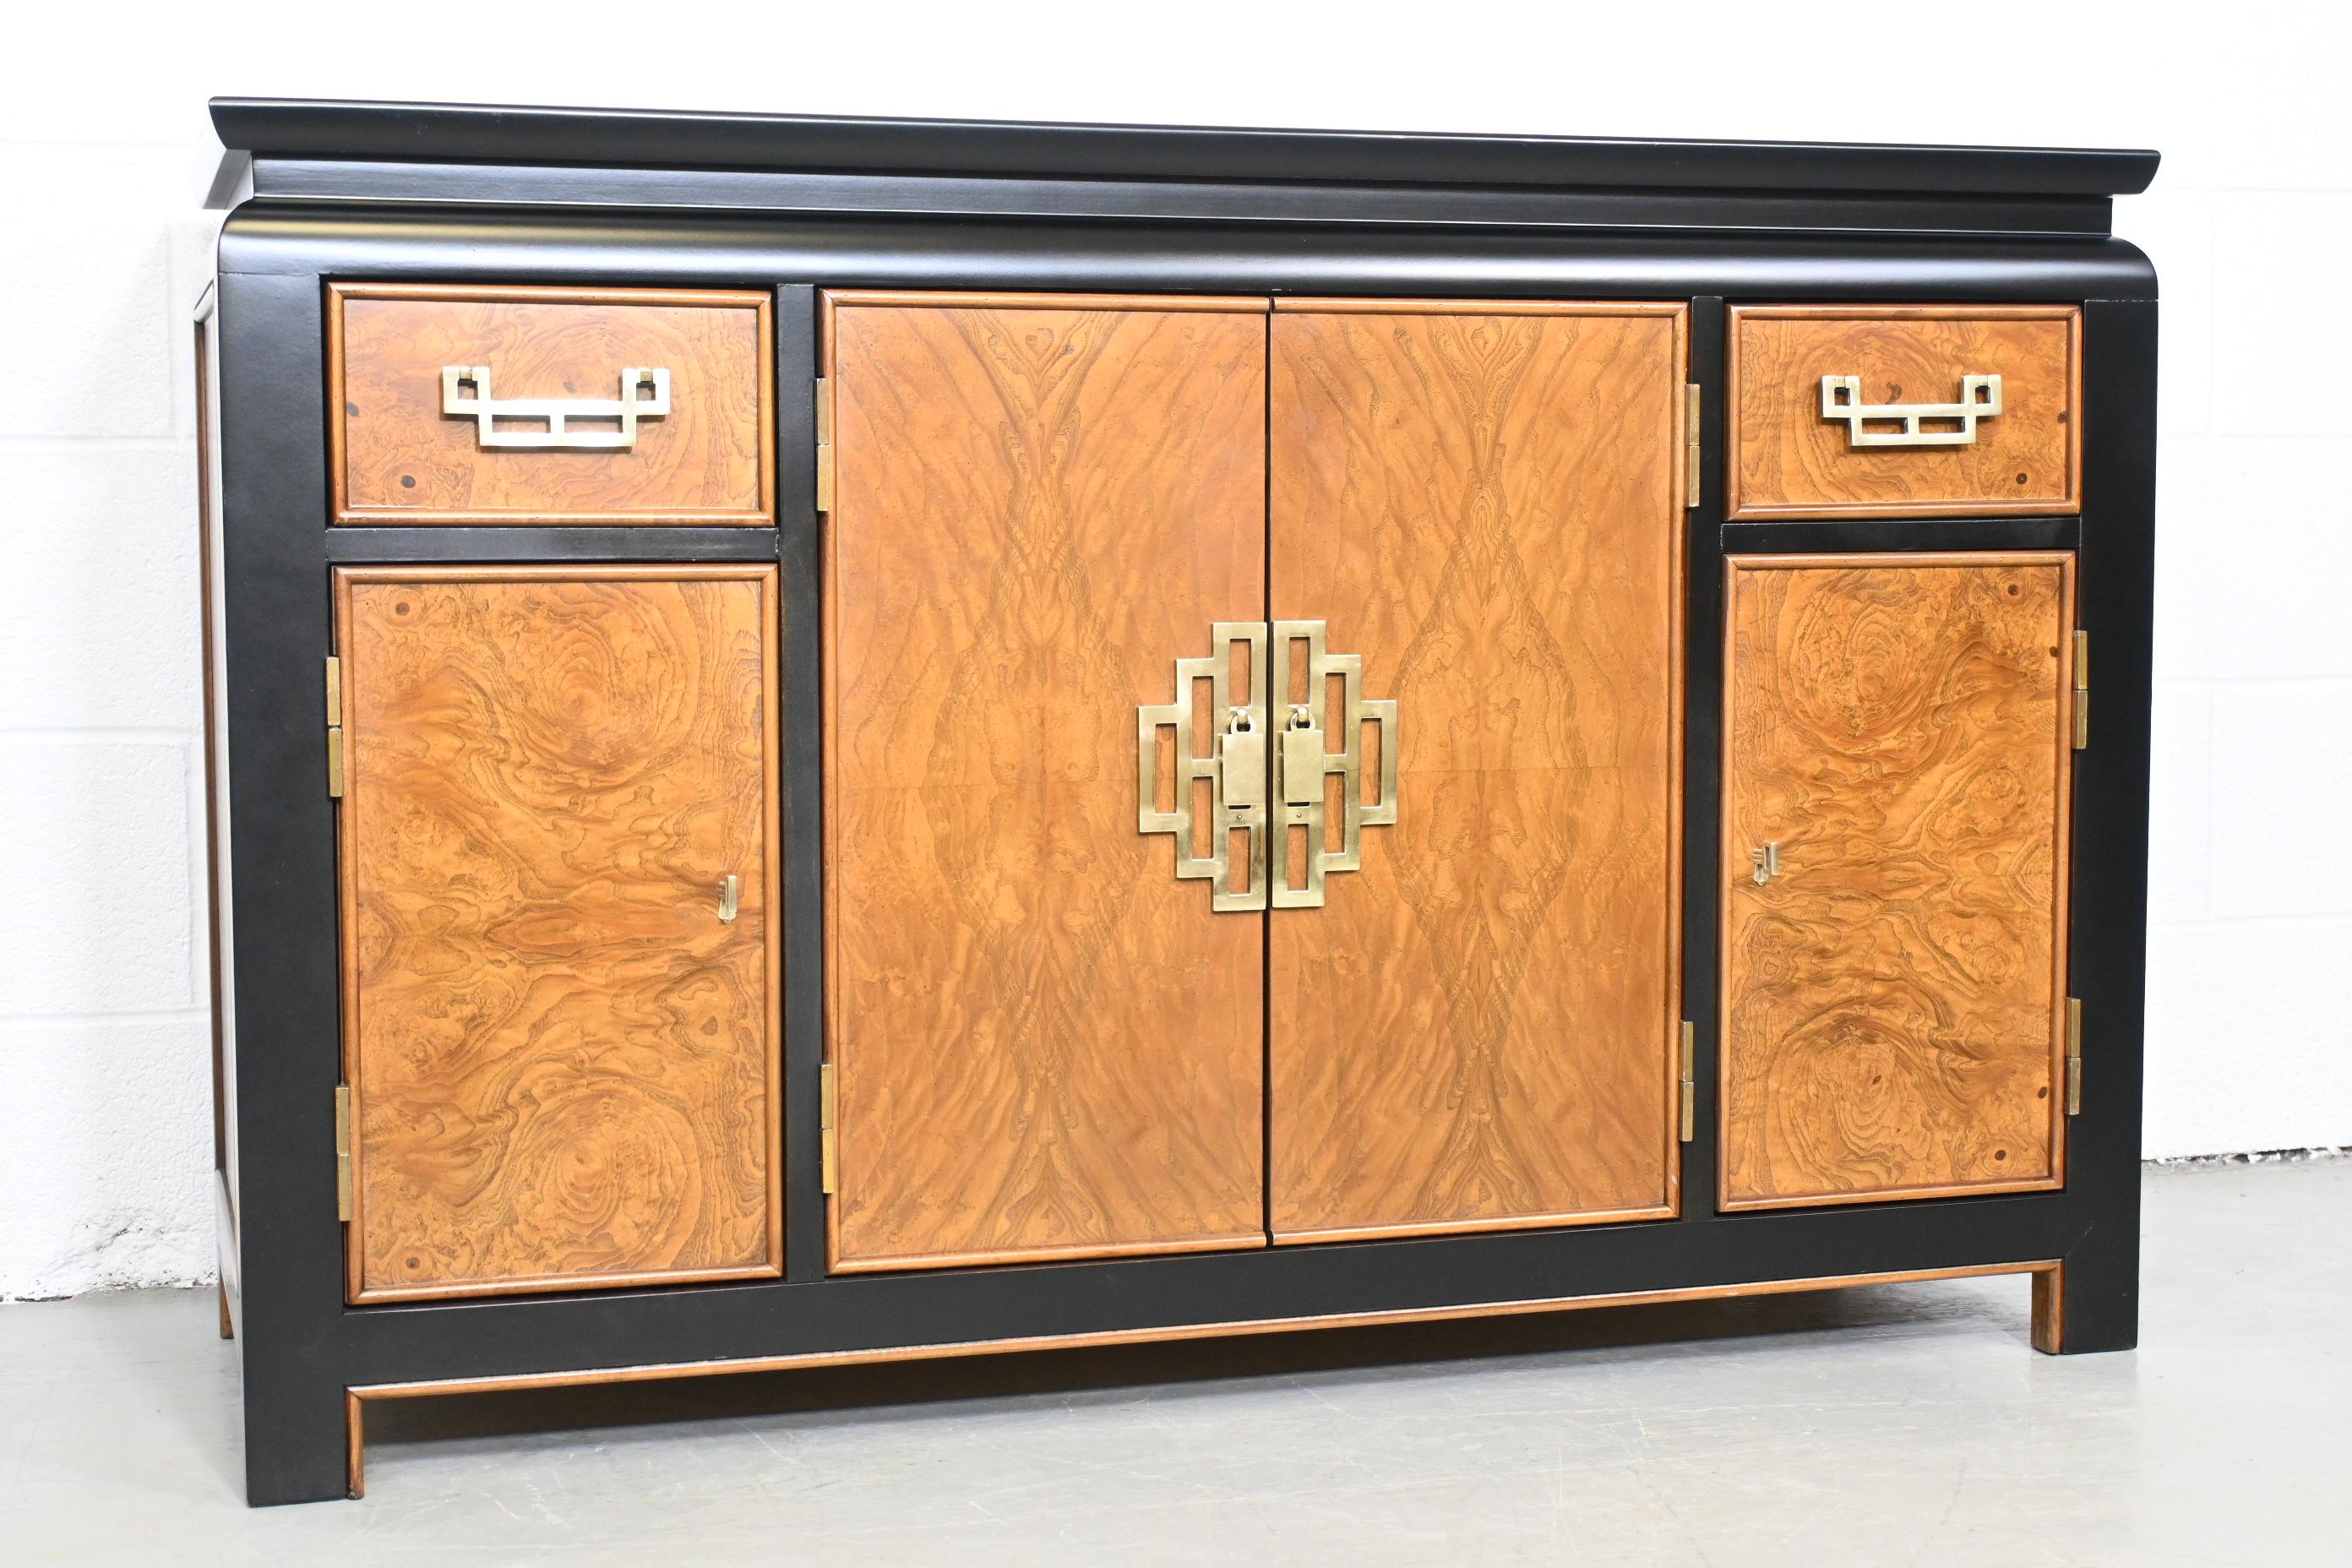 Century Furniture Chin Hua by Raymond Sobota Chinoiserie credenza or bar cabinet

Century Furniture, USA, 1970s

Measures: 48 Wide x 18.5 Deep x 31.13 High.

Burl wood design with black lacquer trim and brass pulls. Unique design allows use as